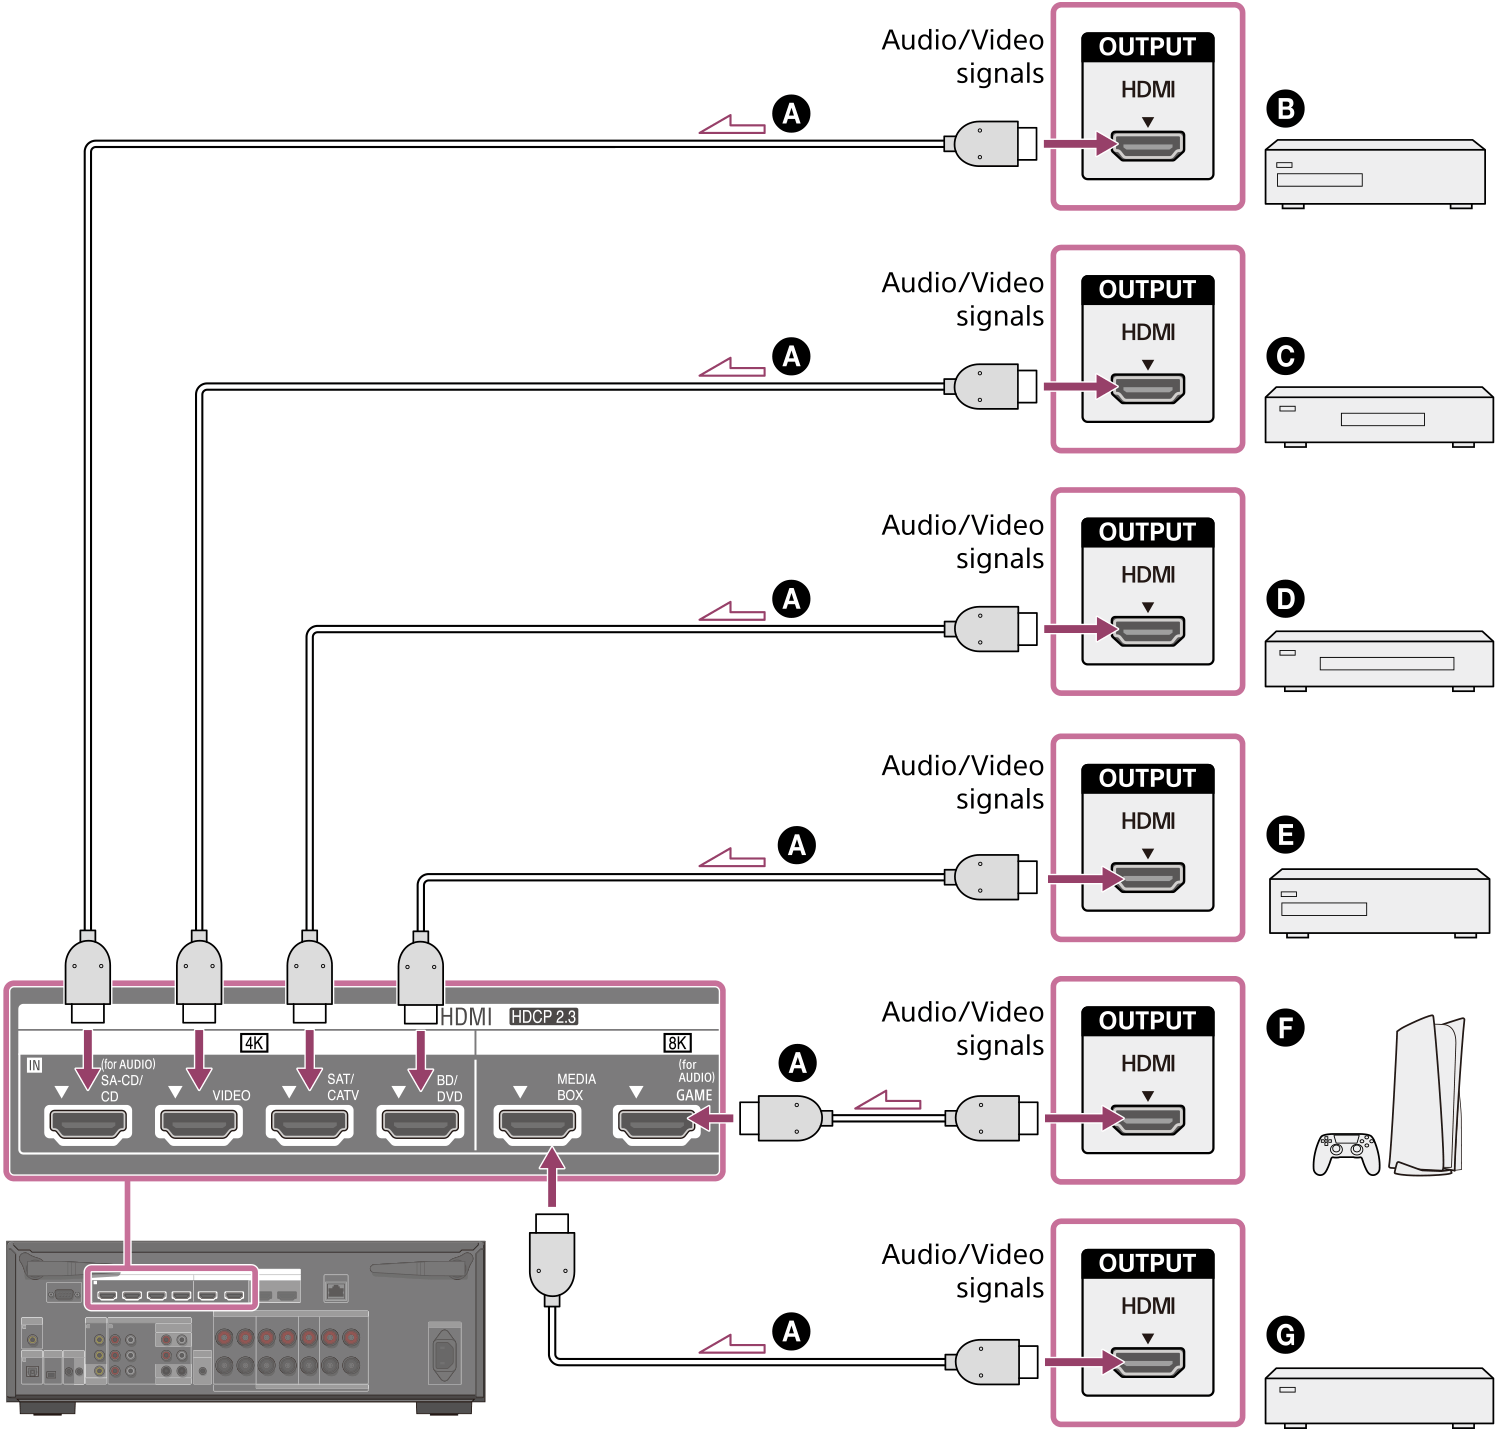 Illustration of connecting the HDMI input jacks on the rear of the unit with the HDMI output jacks of devices using the HDMI cables (not supplied).